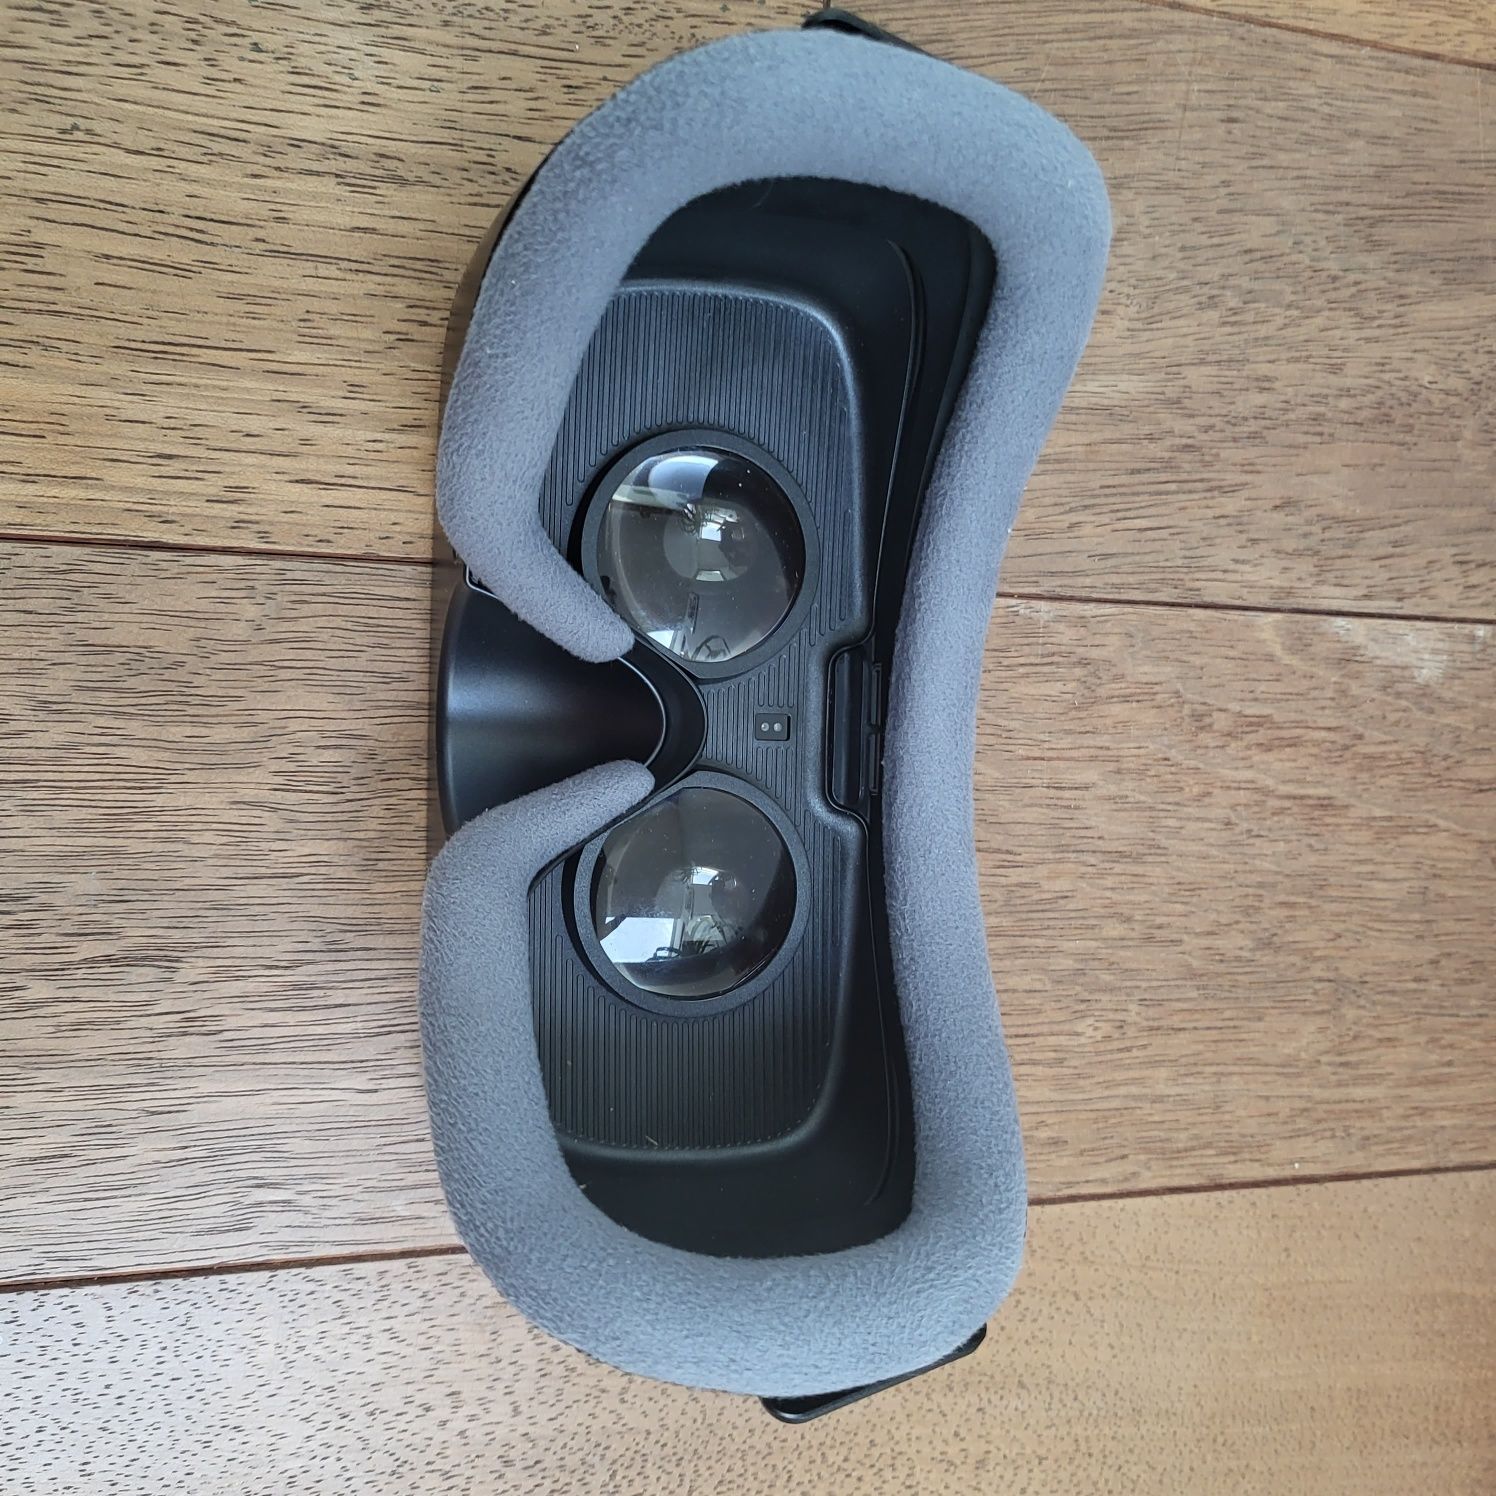 Samsung Gear Vr with controller